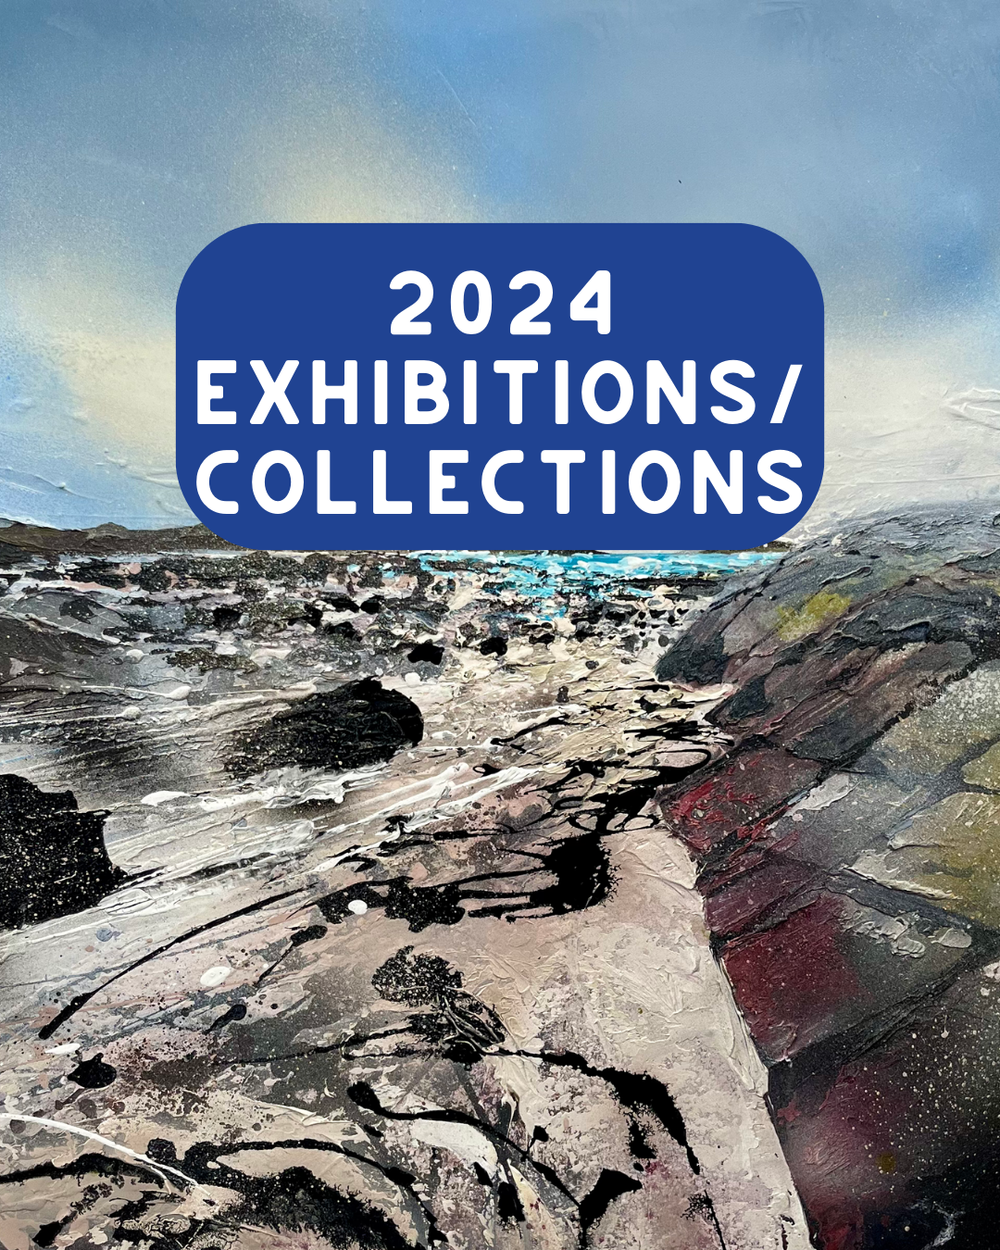 001 - 2024 EXHIBITIONS.png